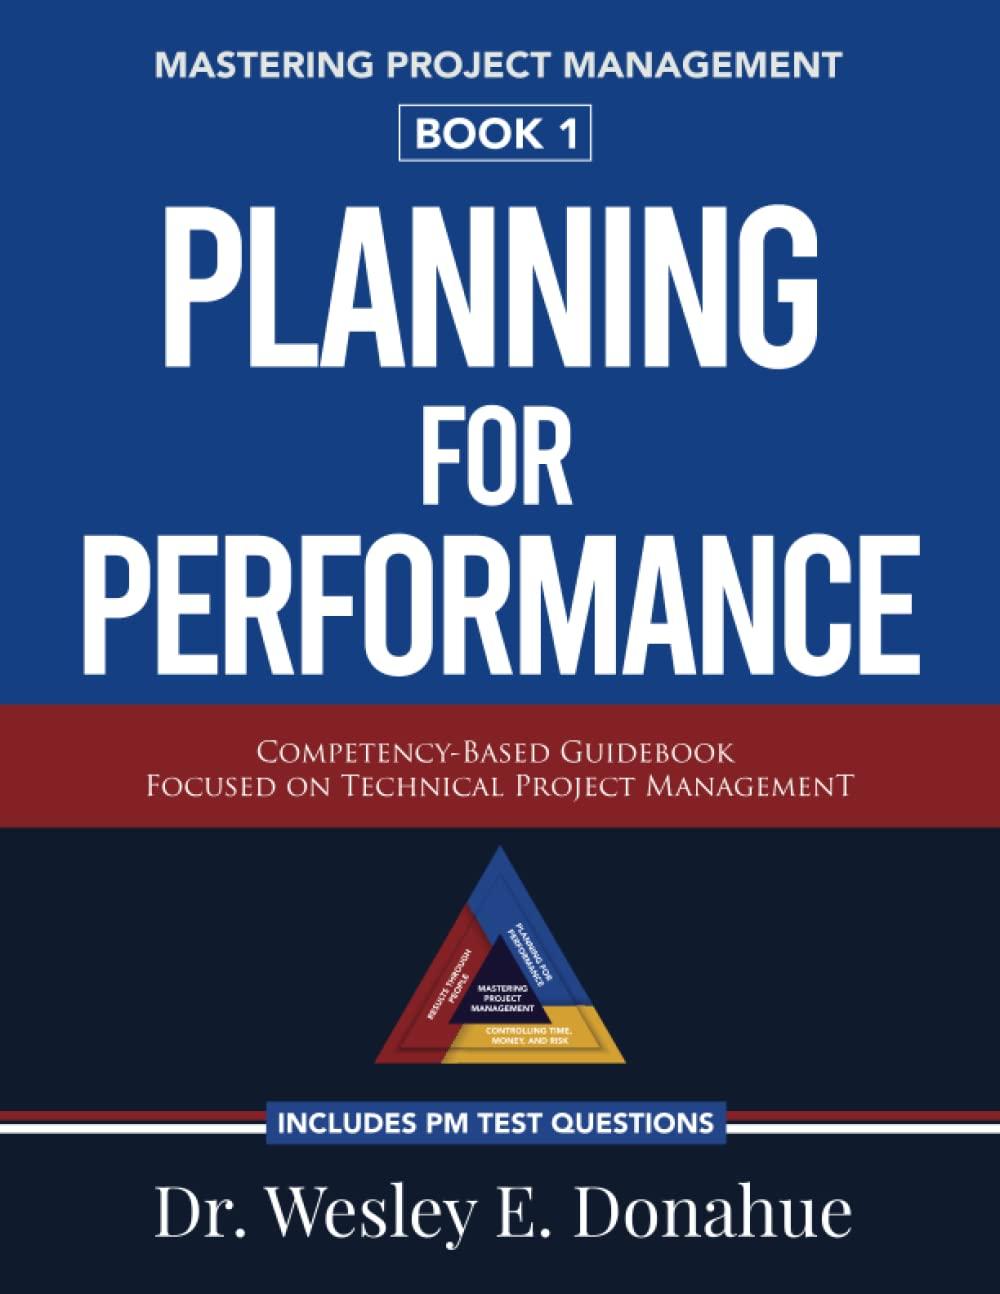 mastering project management book 1 planning for performance competency based guidebook focused on technical